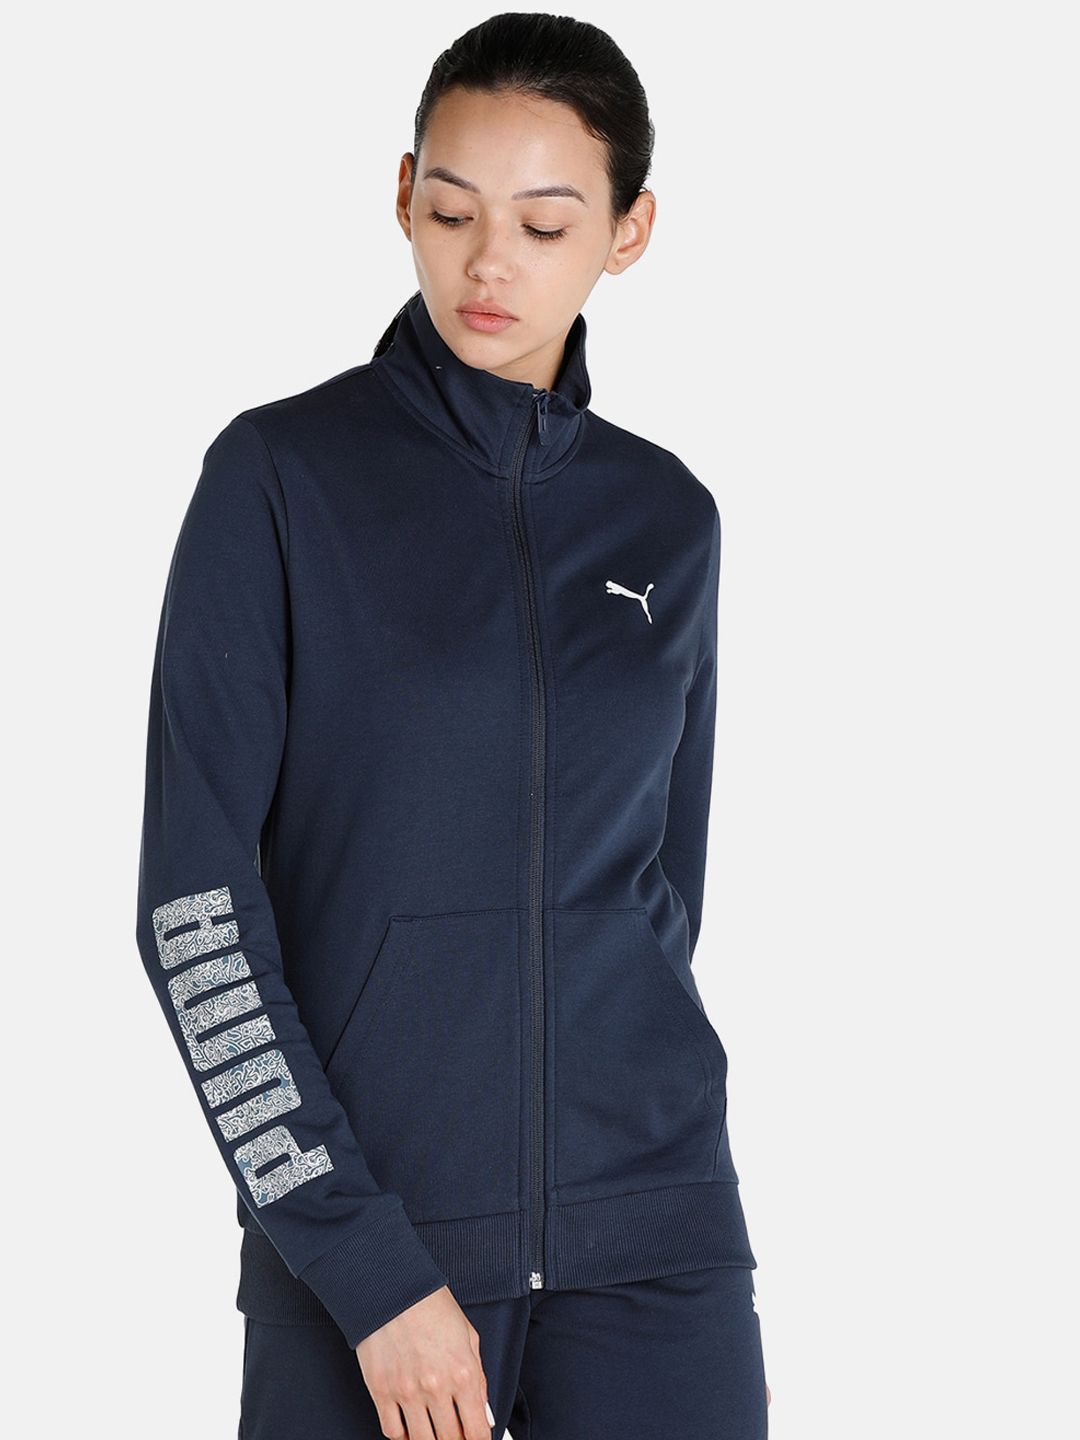 Puma Women Blue Solid Cotton Sporty Jackets Price in India